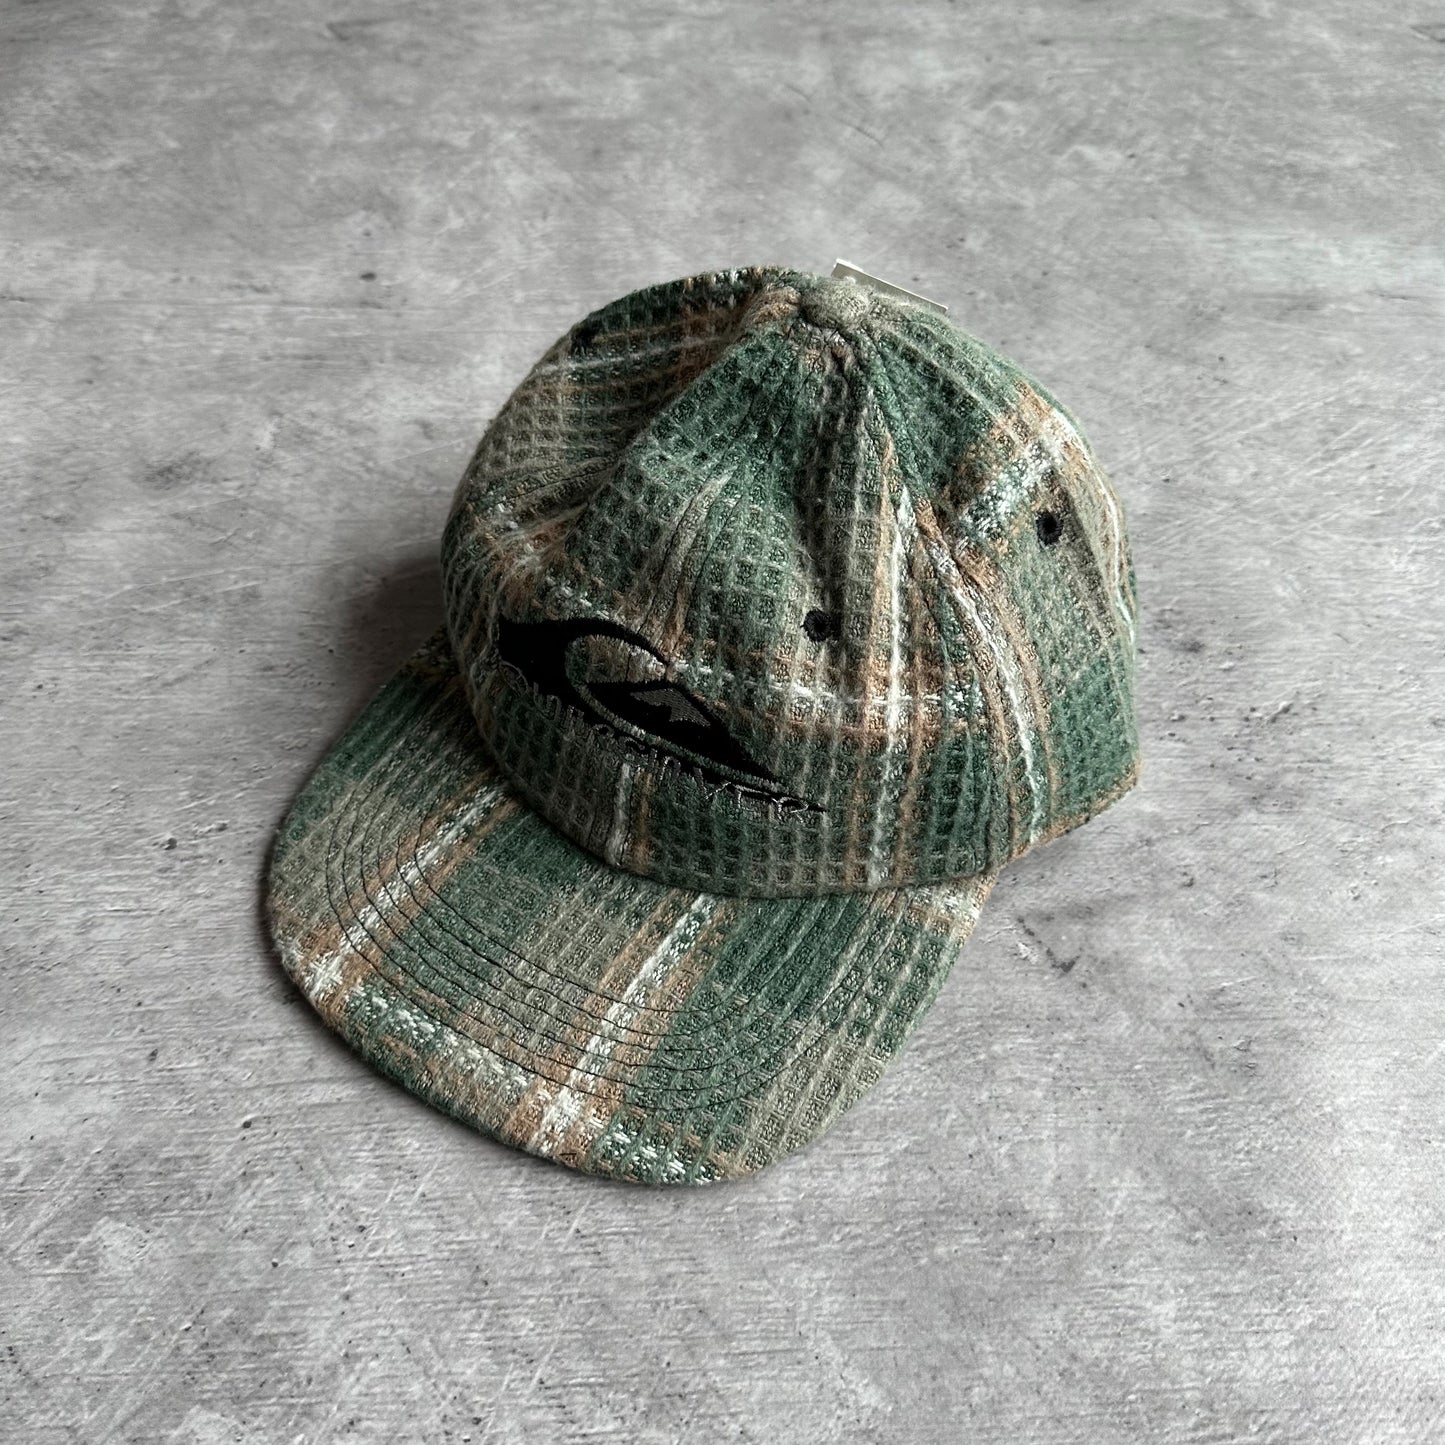 Vintage Quiksilver Cap *DEAD STOCK WITH TAG*